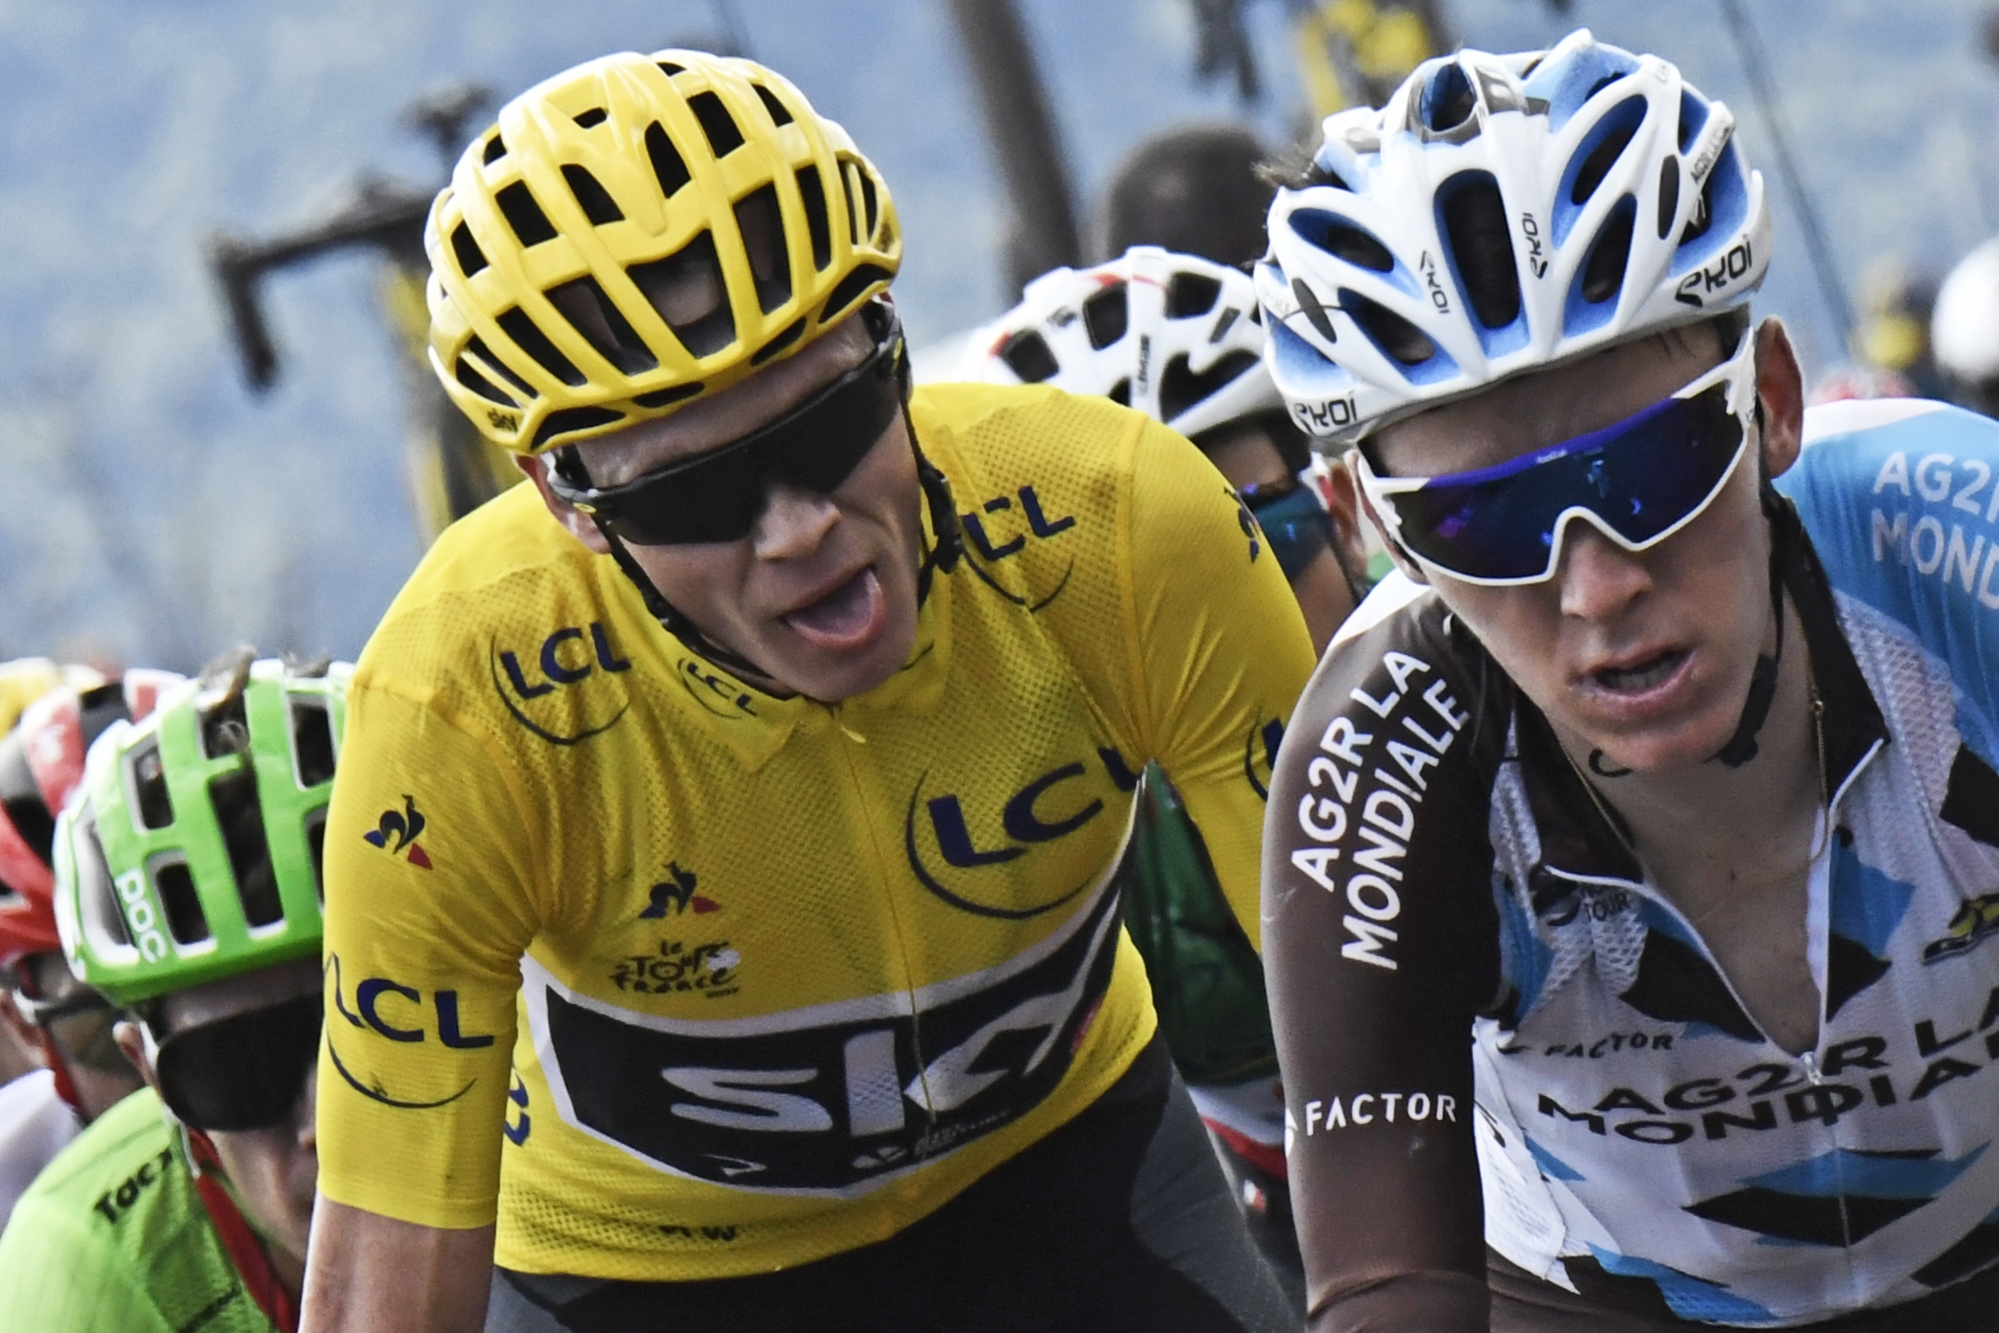 Britain's Chris Froome, wearing the overall leader's yellow jersey, grimaces, as he climbs with France's Romain Bardet, right, and Colombia's Rigoberto Uran, left, during the fifteenth stage of the Tour de France cycling race over 189.5 kilometers (117.8 miles) with start in Laissac-Severac l'Eglise and finish in Le Puy-en-Velay, France, Sunday, July 16, 2017. (Jeff Pachoud, Pool photo via AP) France Cycling Tour de France